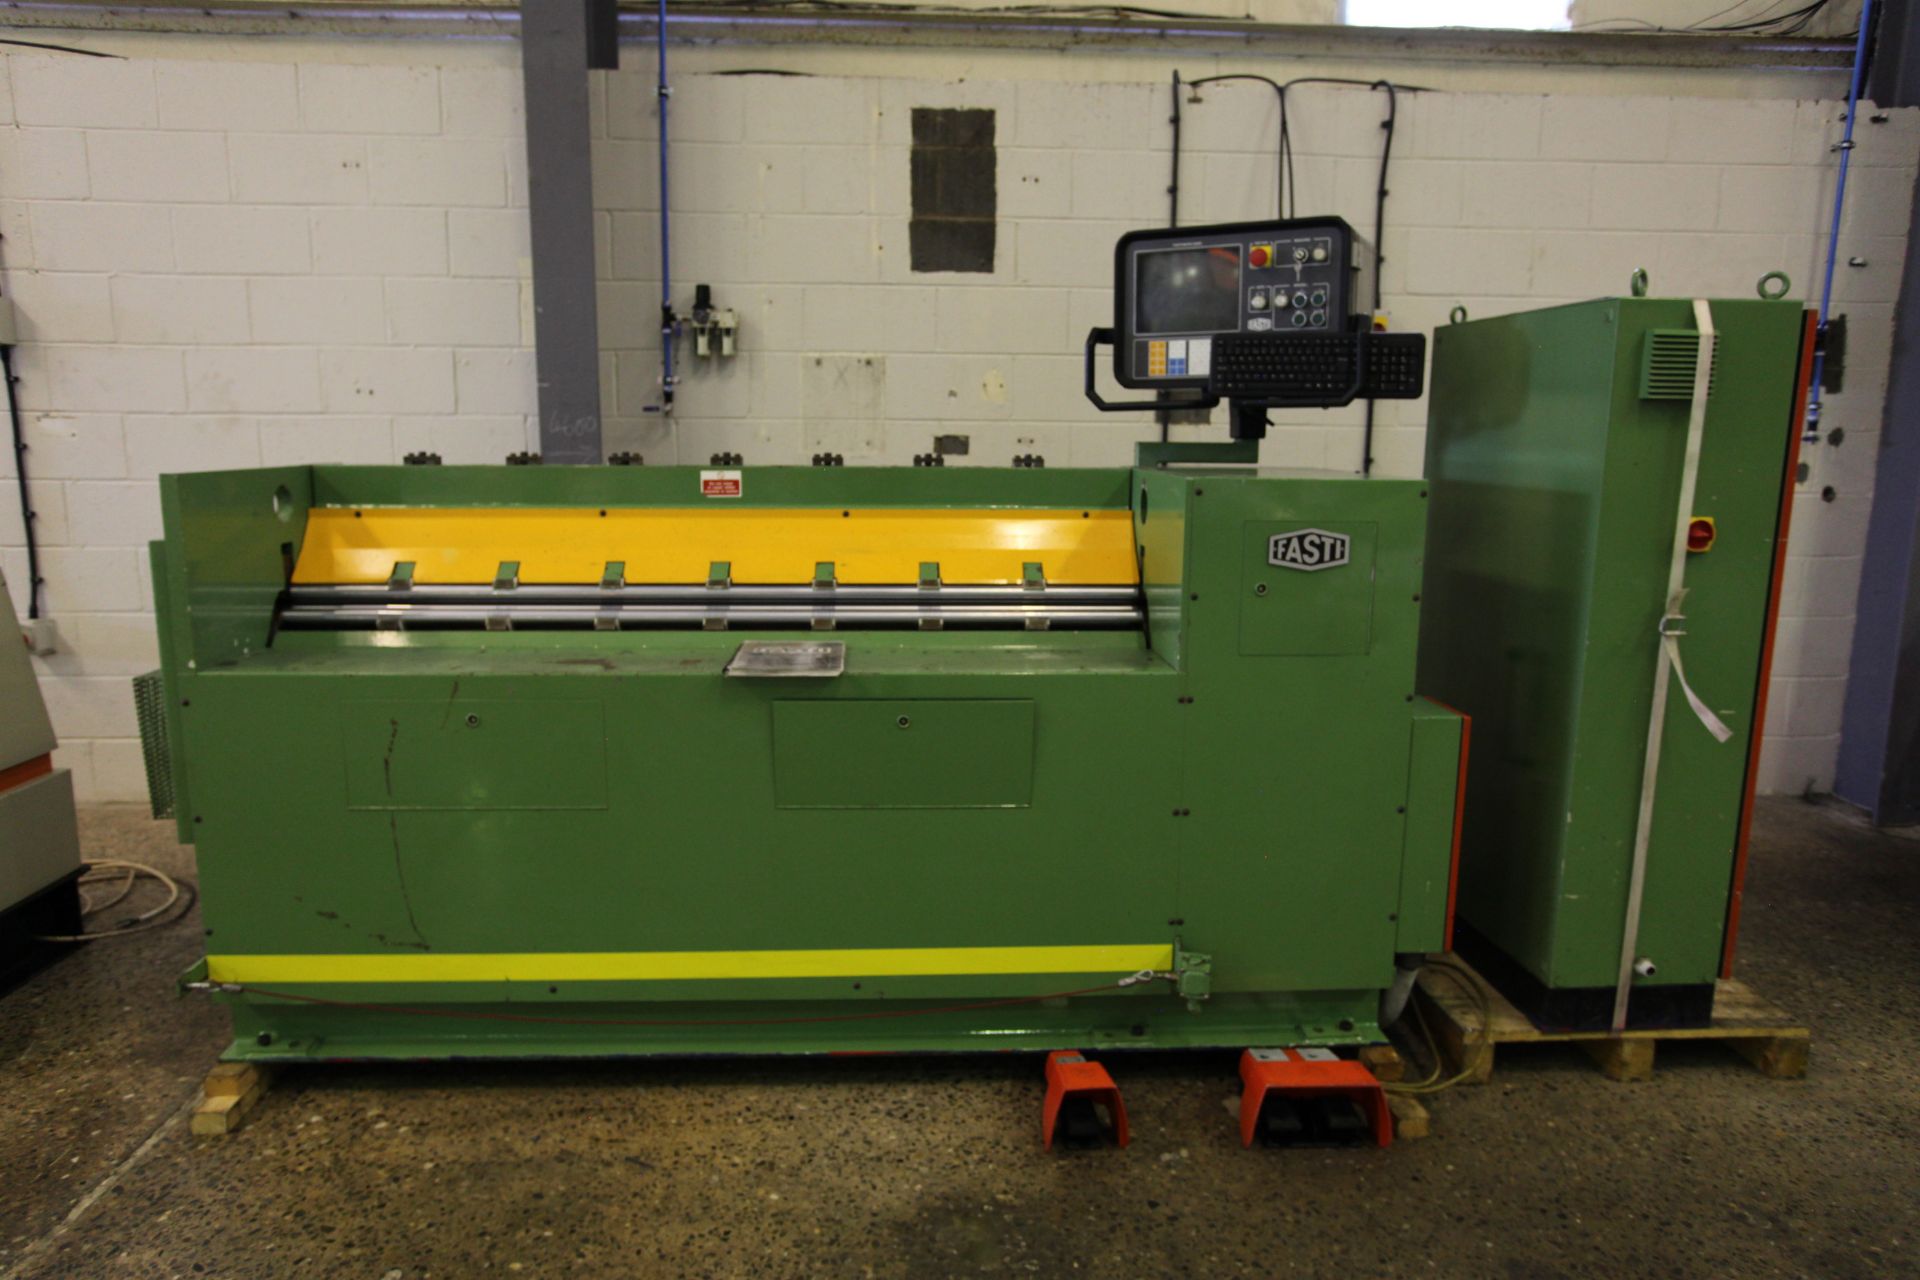 Fasti 1044-18-0.75 Reflector Bending Machine, serial no. 94144 002, dimensions approx. 280cm wide - Image 4 of 10